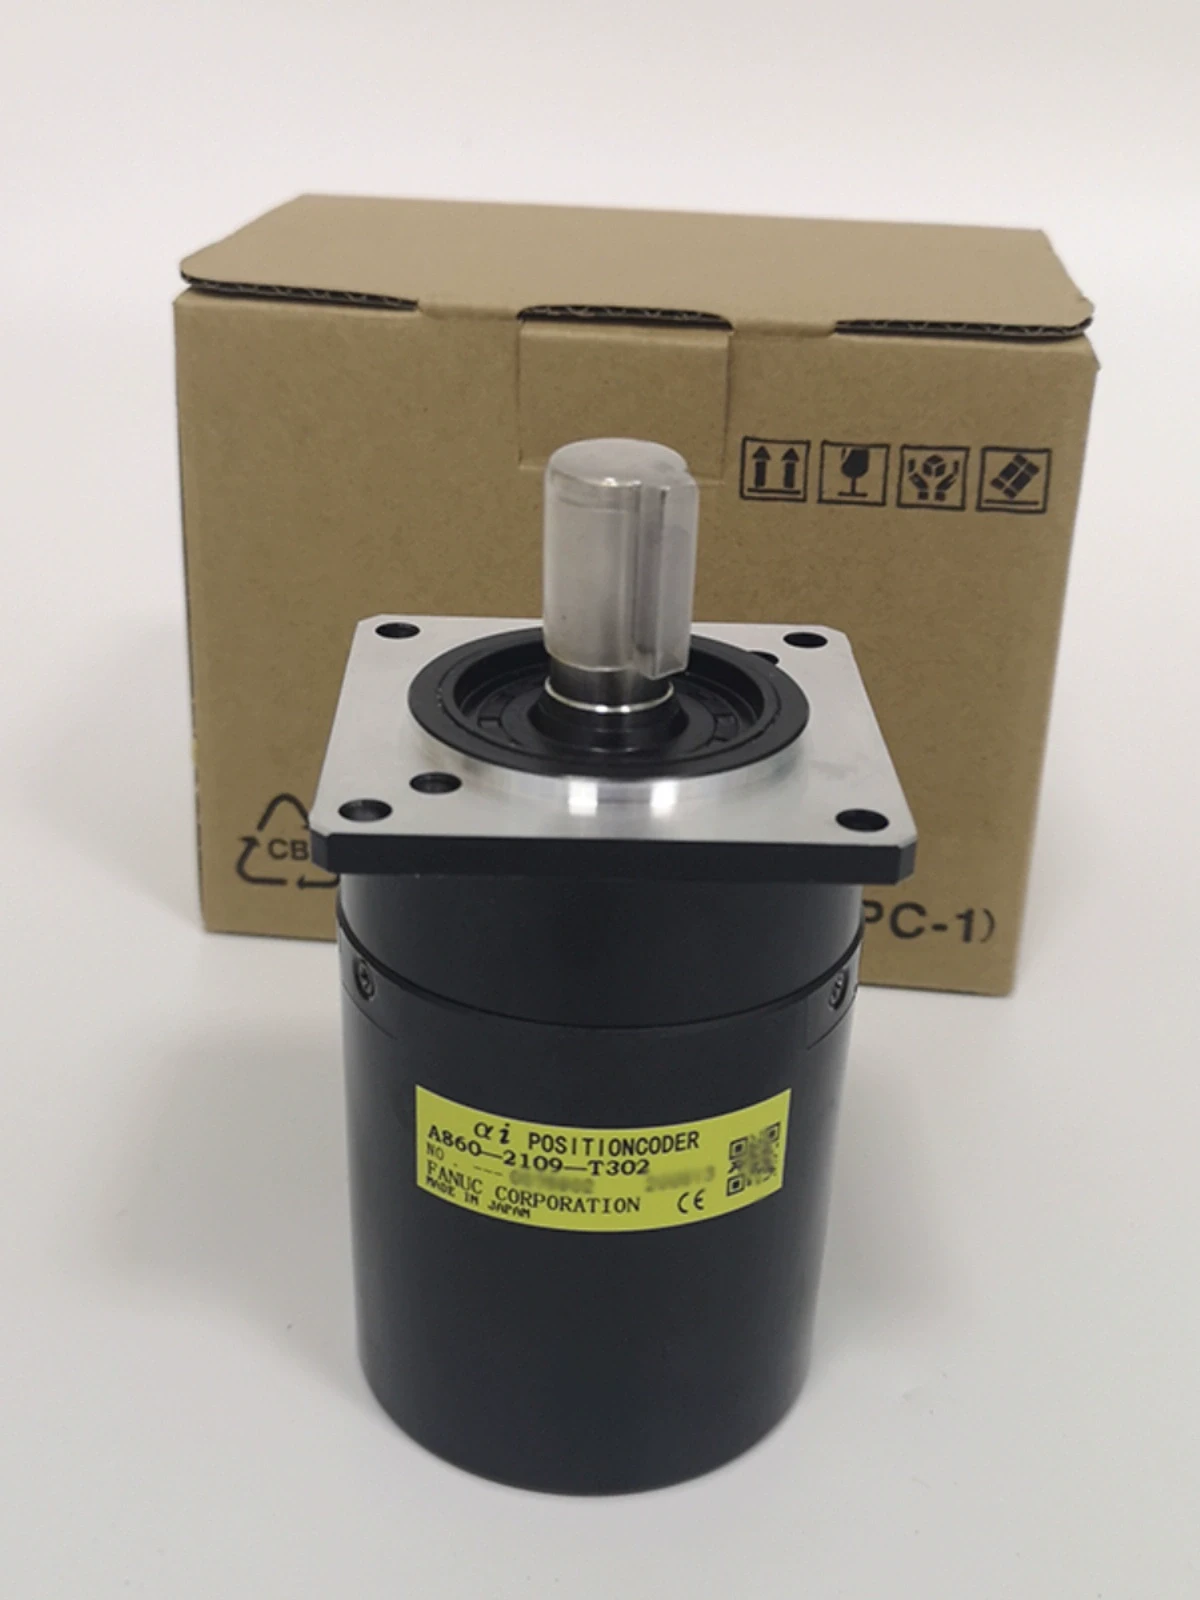 A860-2109-T302 0309-T302 2159-T302 FANUC system spindle encoder